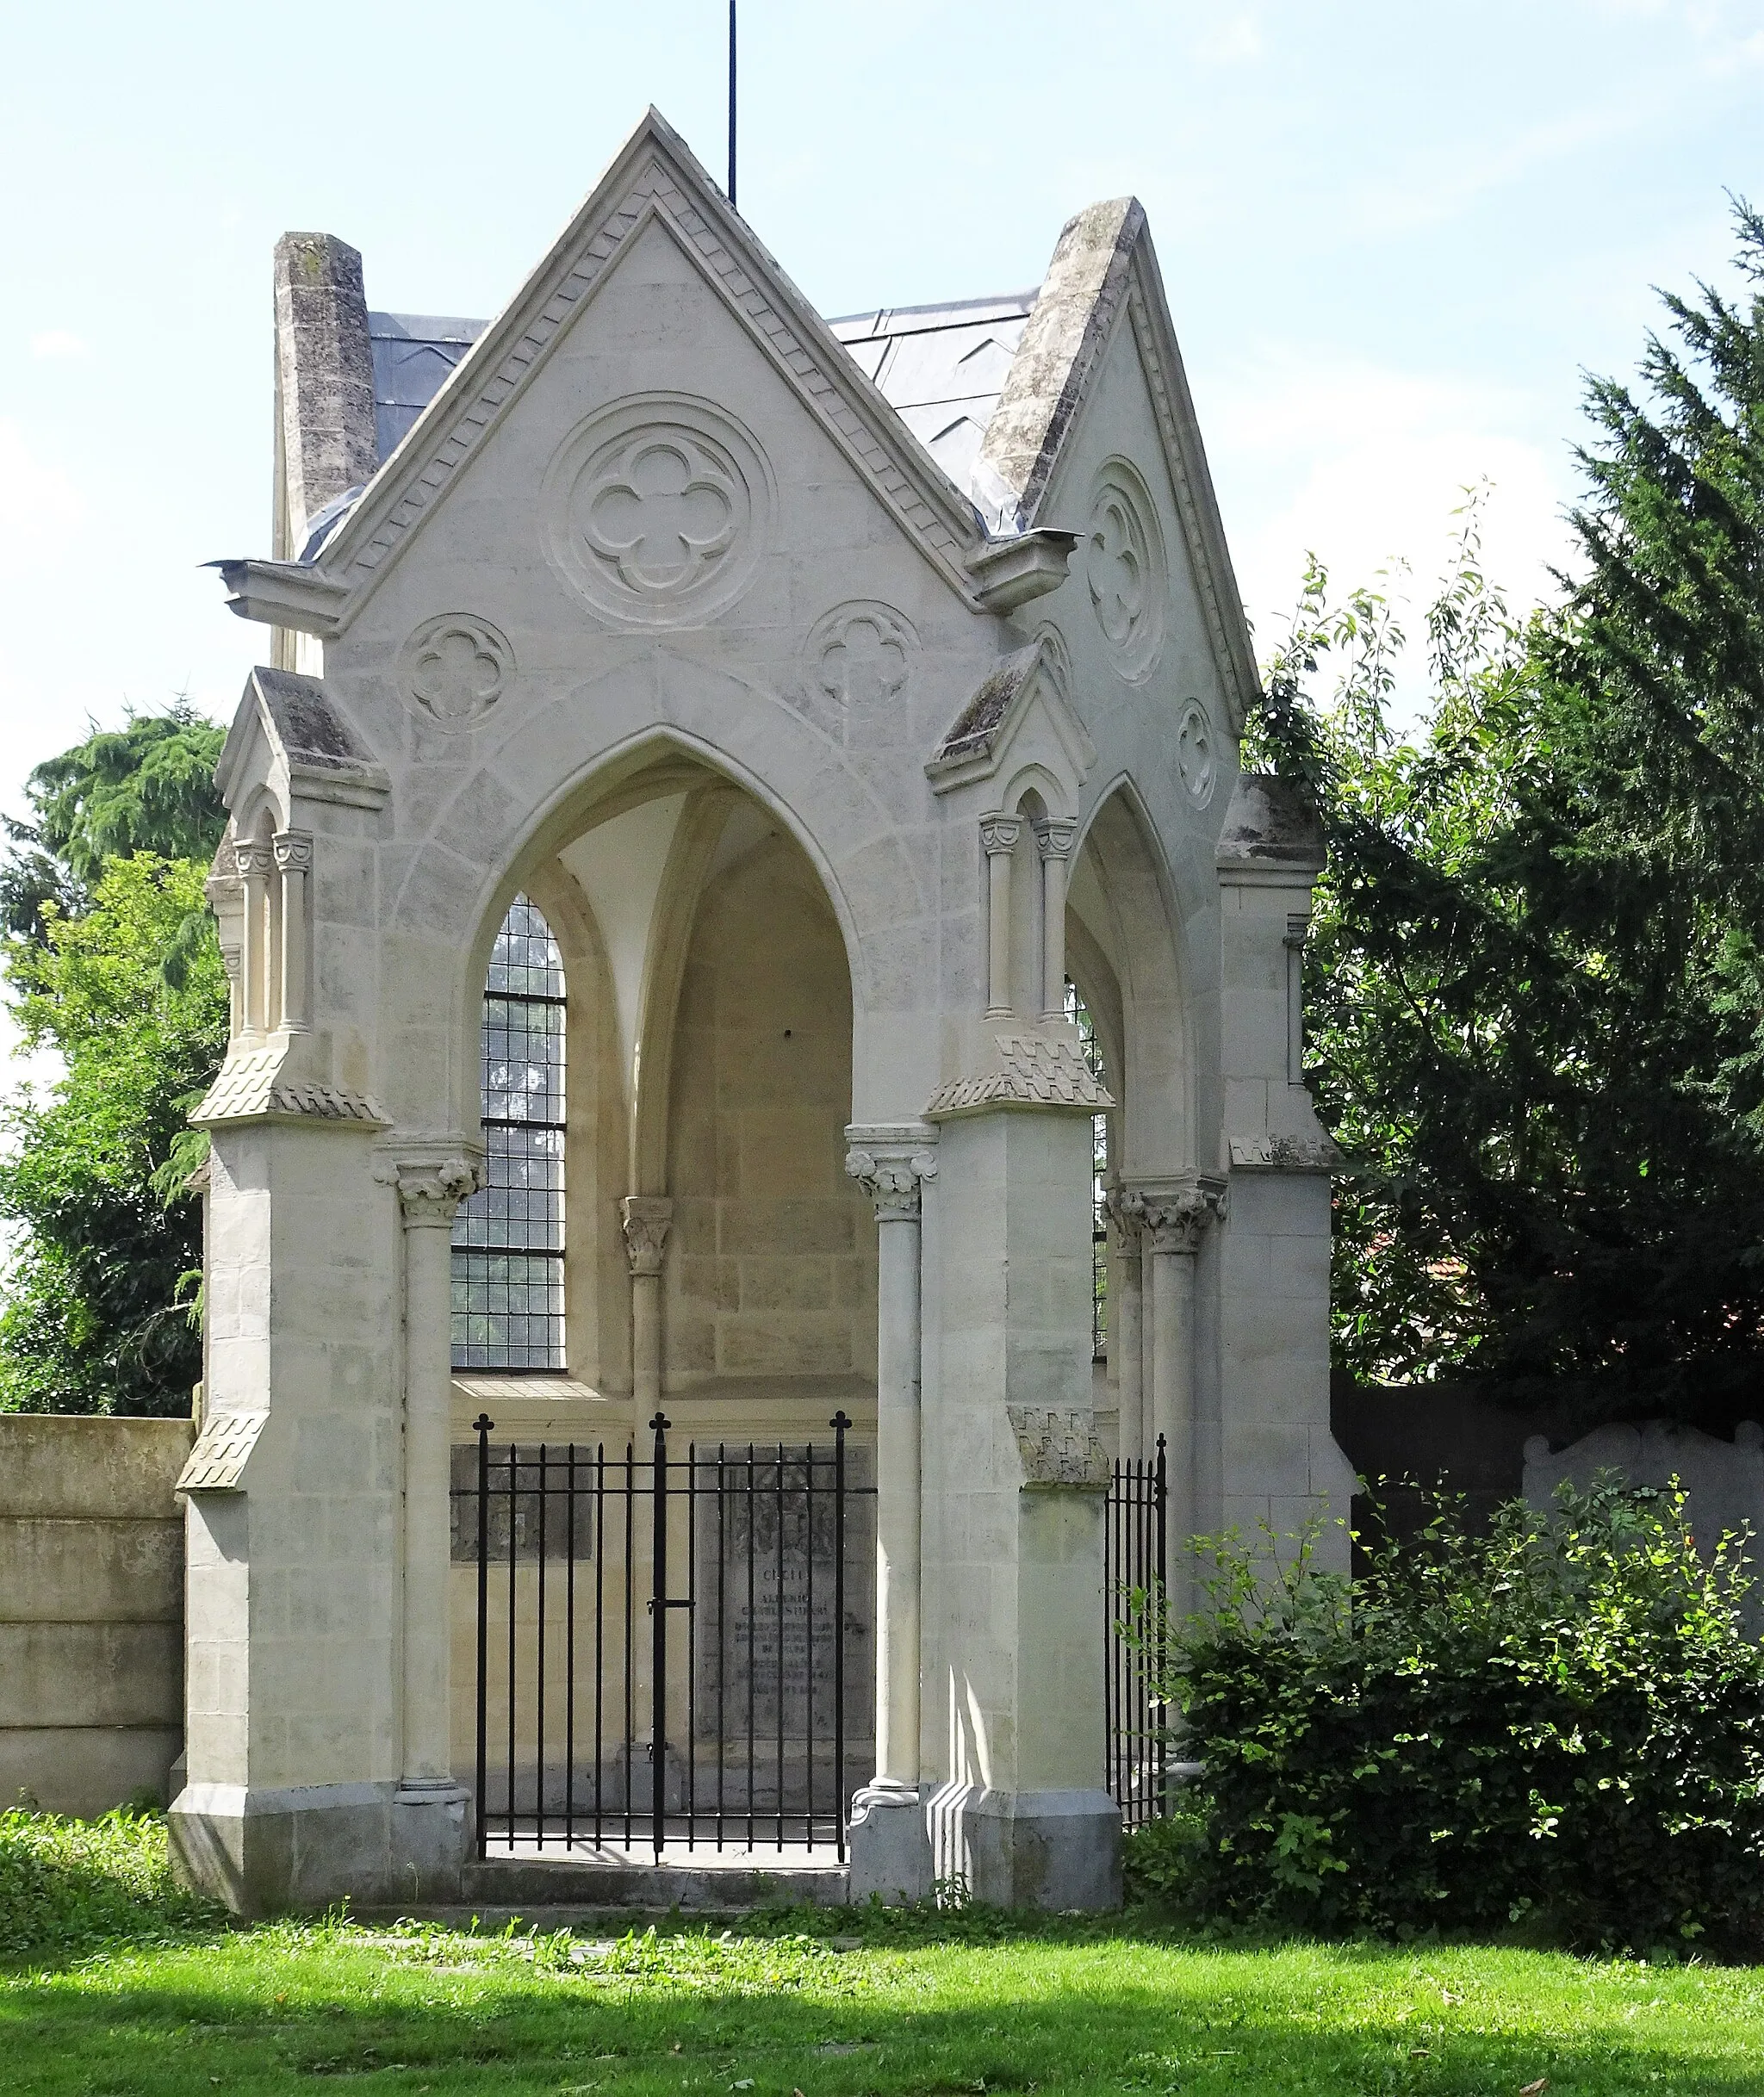 Photo showing: chapel of the counts of Hespel d'Hocron.- The counts of Hespel were a large family from Wallerand Hespel, 1st of the line since 1495. They owned land in the districts of Weppes, Carembaut, Ferrain, Pévèle, Mélantois , in Artois and in the Chatellenie de Courtrai. These areas extended more particularly to Fournes-en-Weppes and Salomé Salomé, France